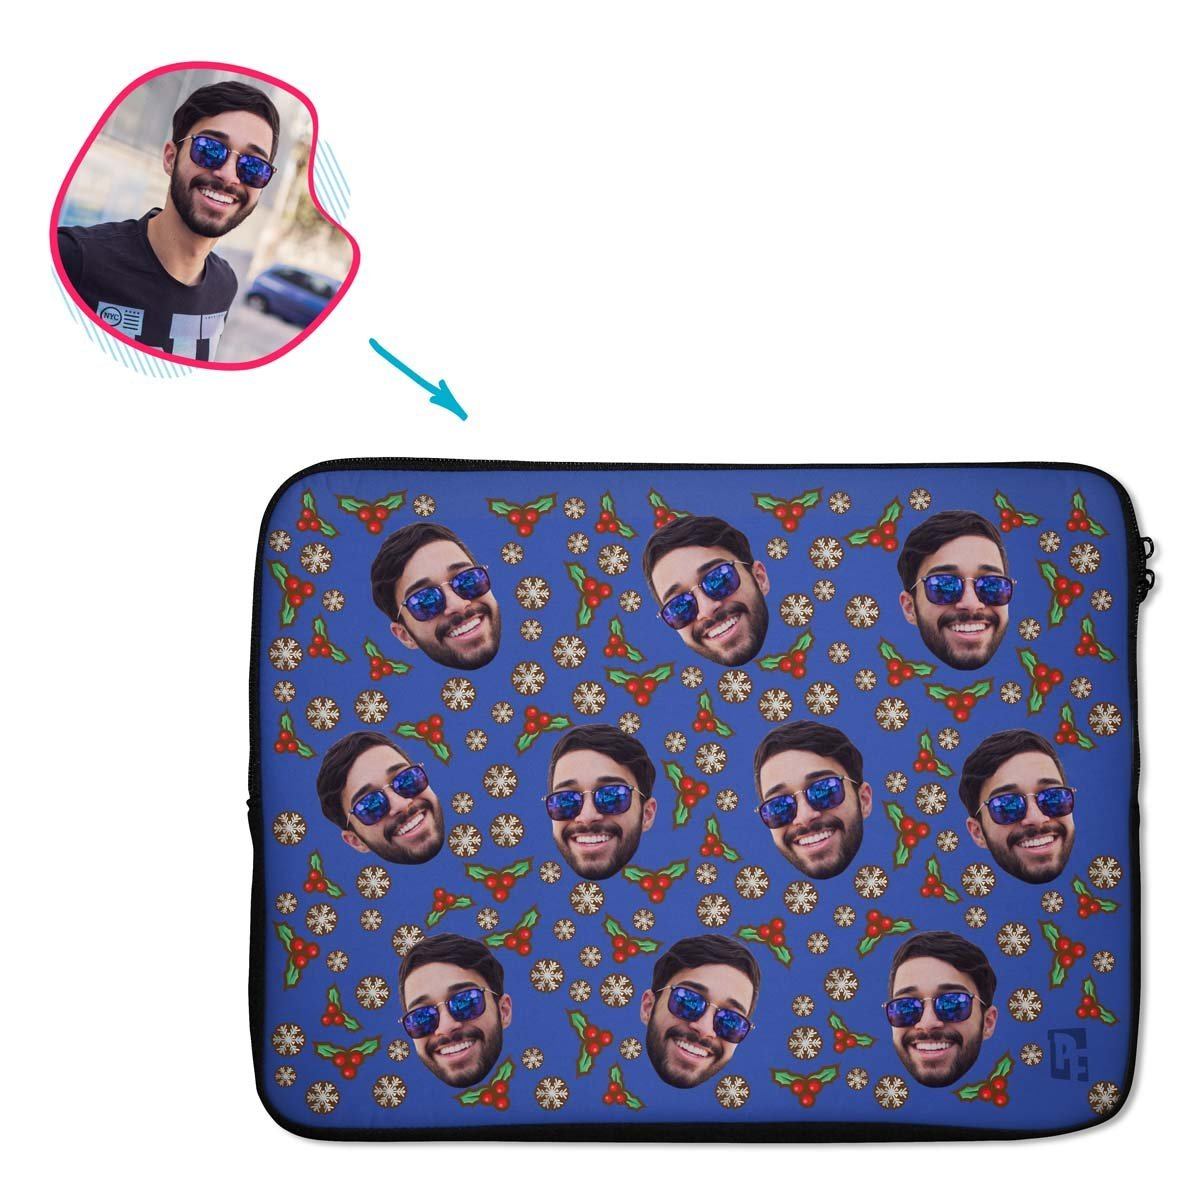 darkblue Mistletoe laptop sleeve personalized with photo of face printed on them